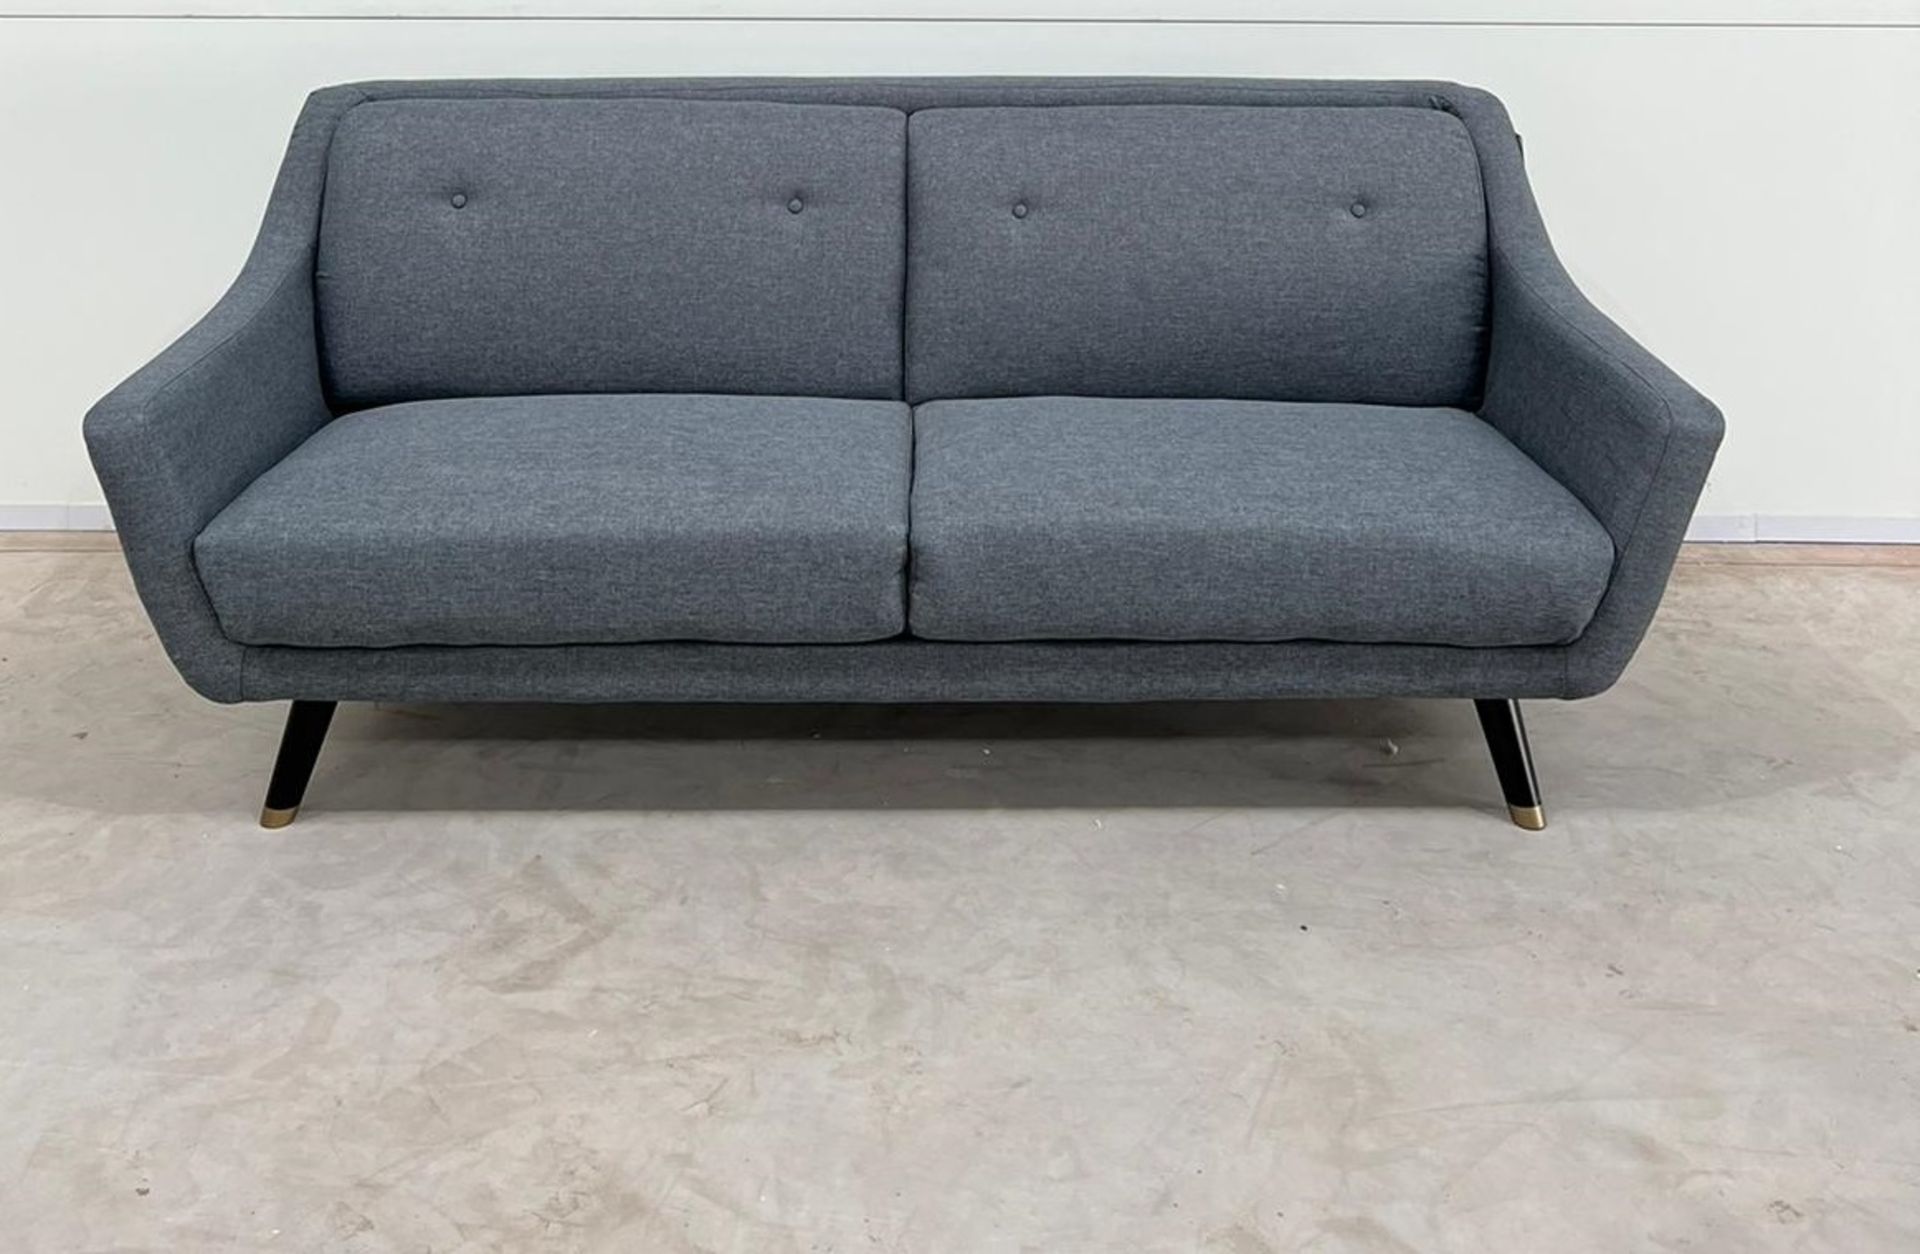 Lance Three Seater Sofa In Grey Linen Legs Finished In Dark Oak With Gold Toned Tips This - Image 2 of 2